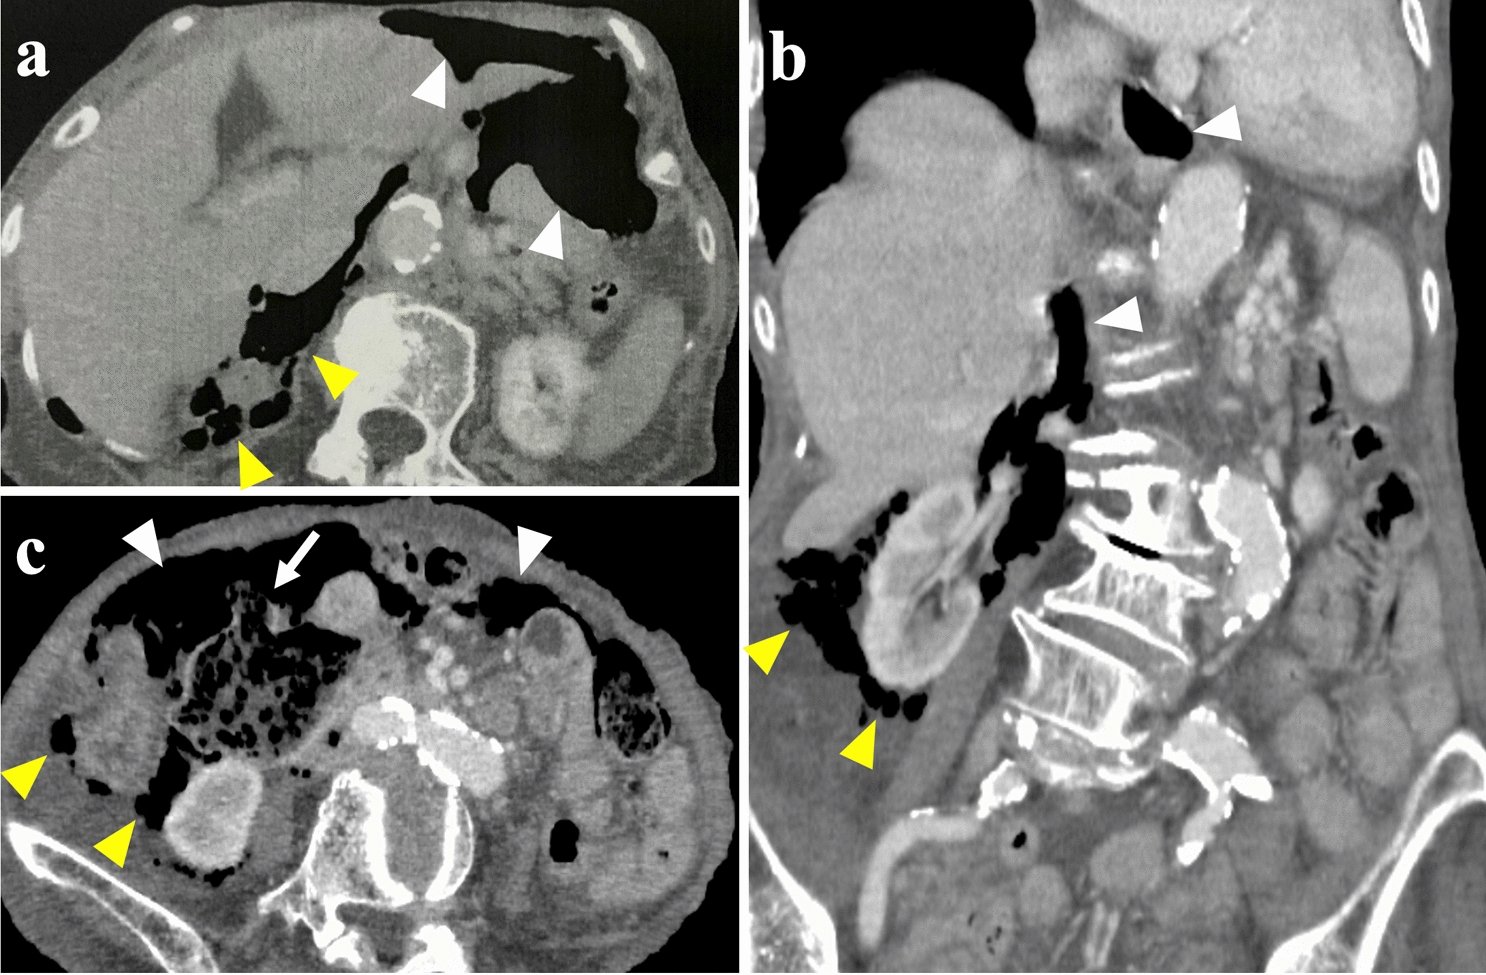 A perforation of a duodenal diverticulum in a 97-year-old patient after total gastrectomy and Roux-en-Y reconstruction: a case report